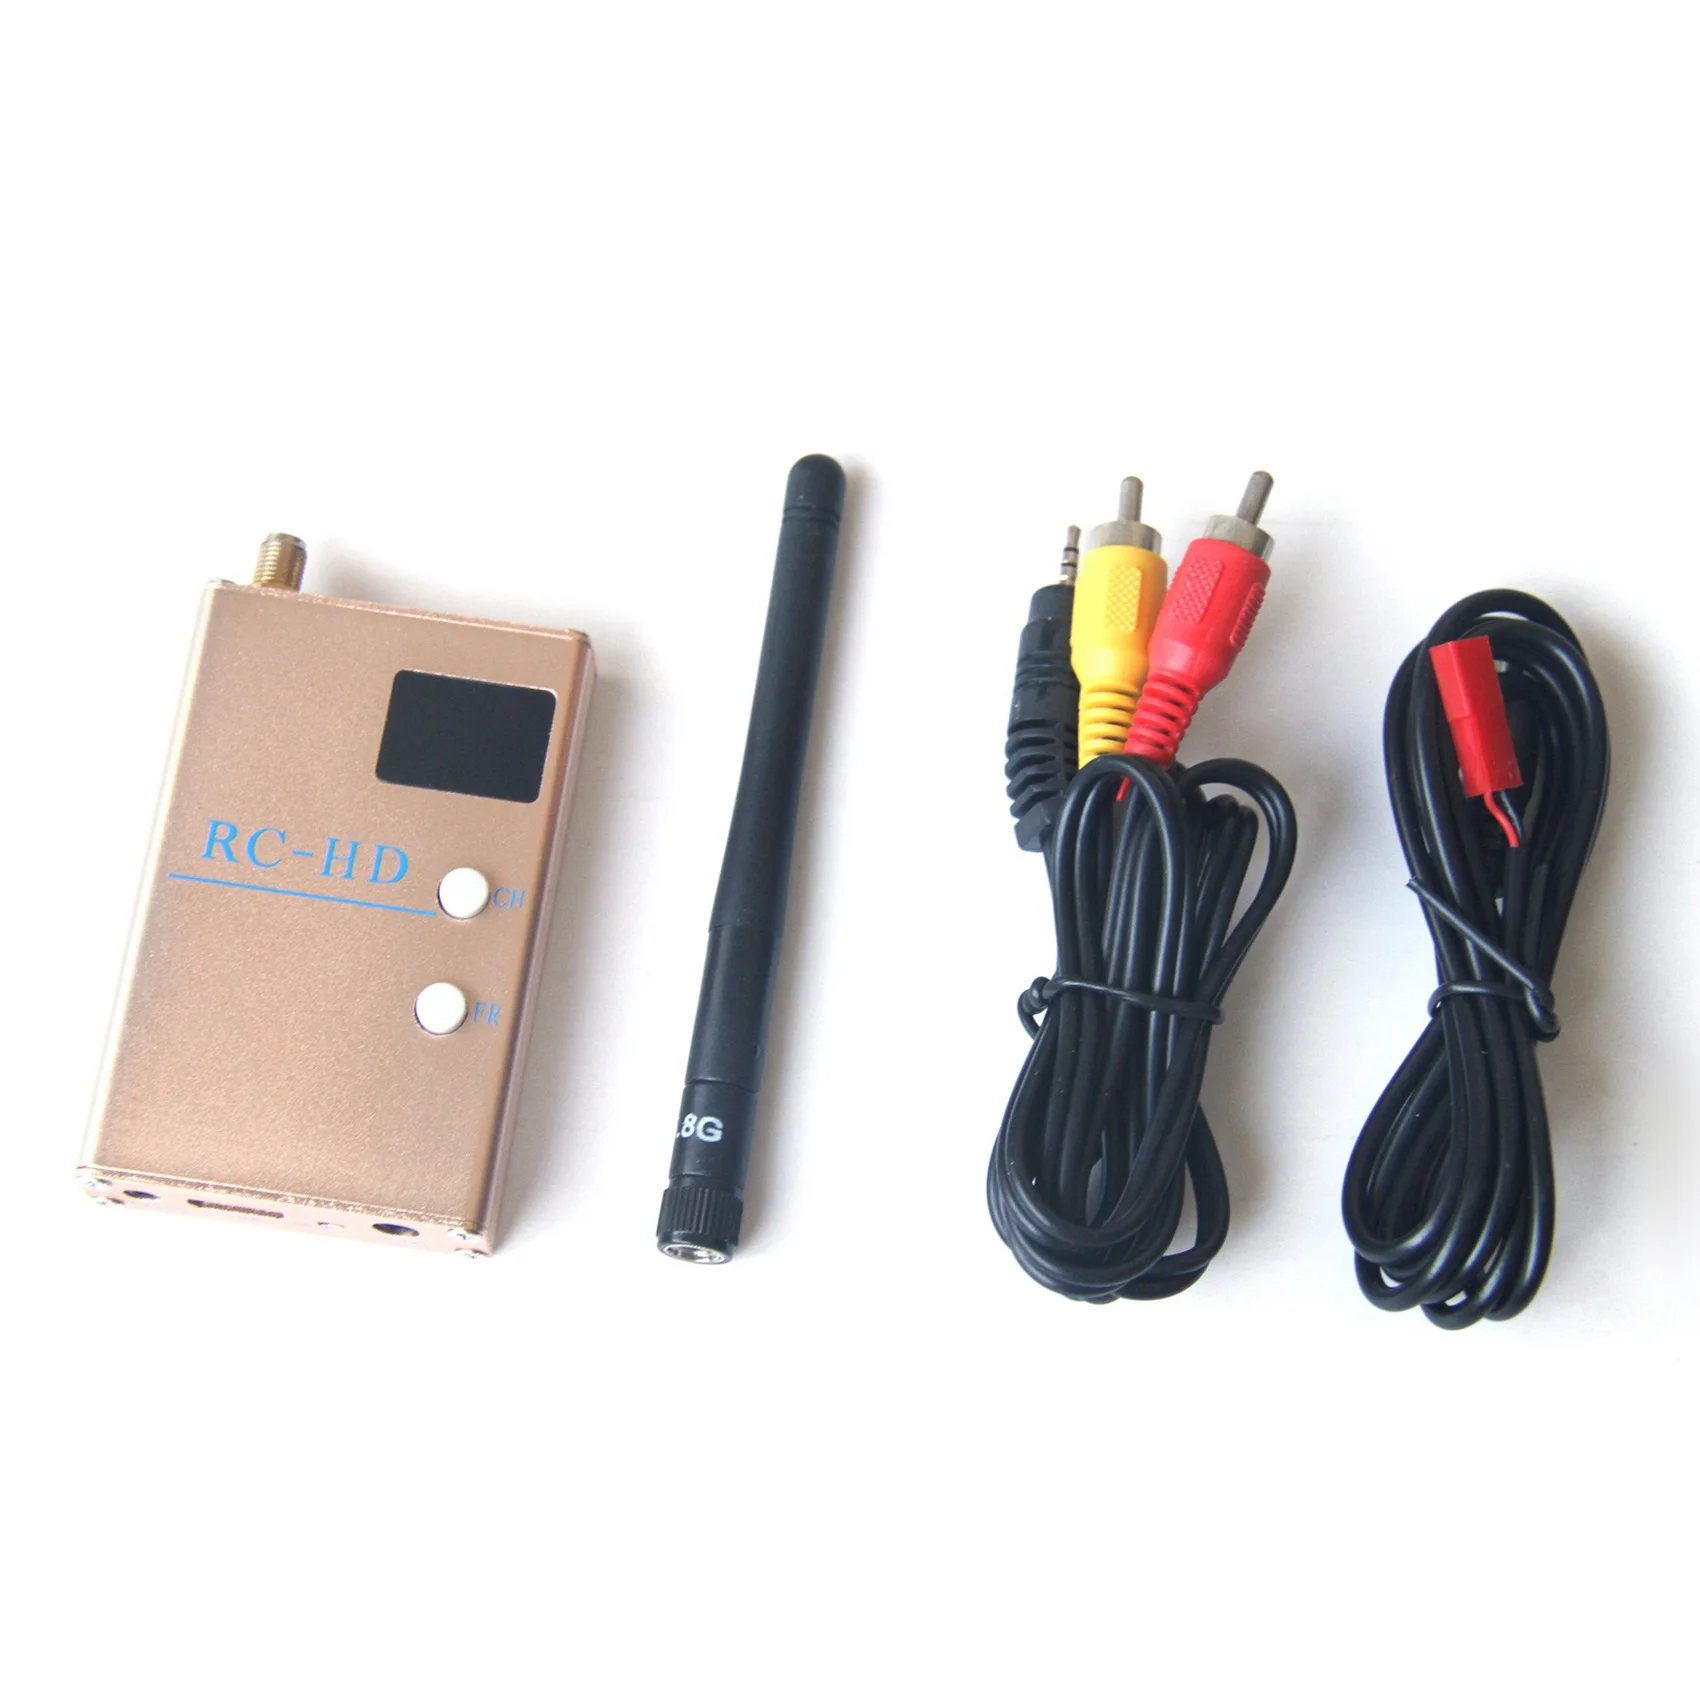 

FPV 5.8G 5.8GHz RC832HD RC-HD Receiver HDMI-Compatible with A/V and Power Cables for Quadcopter F450 S550